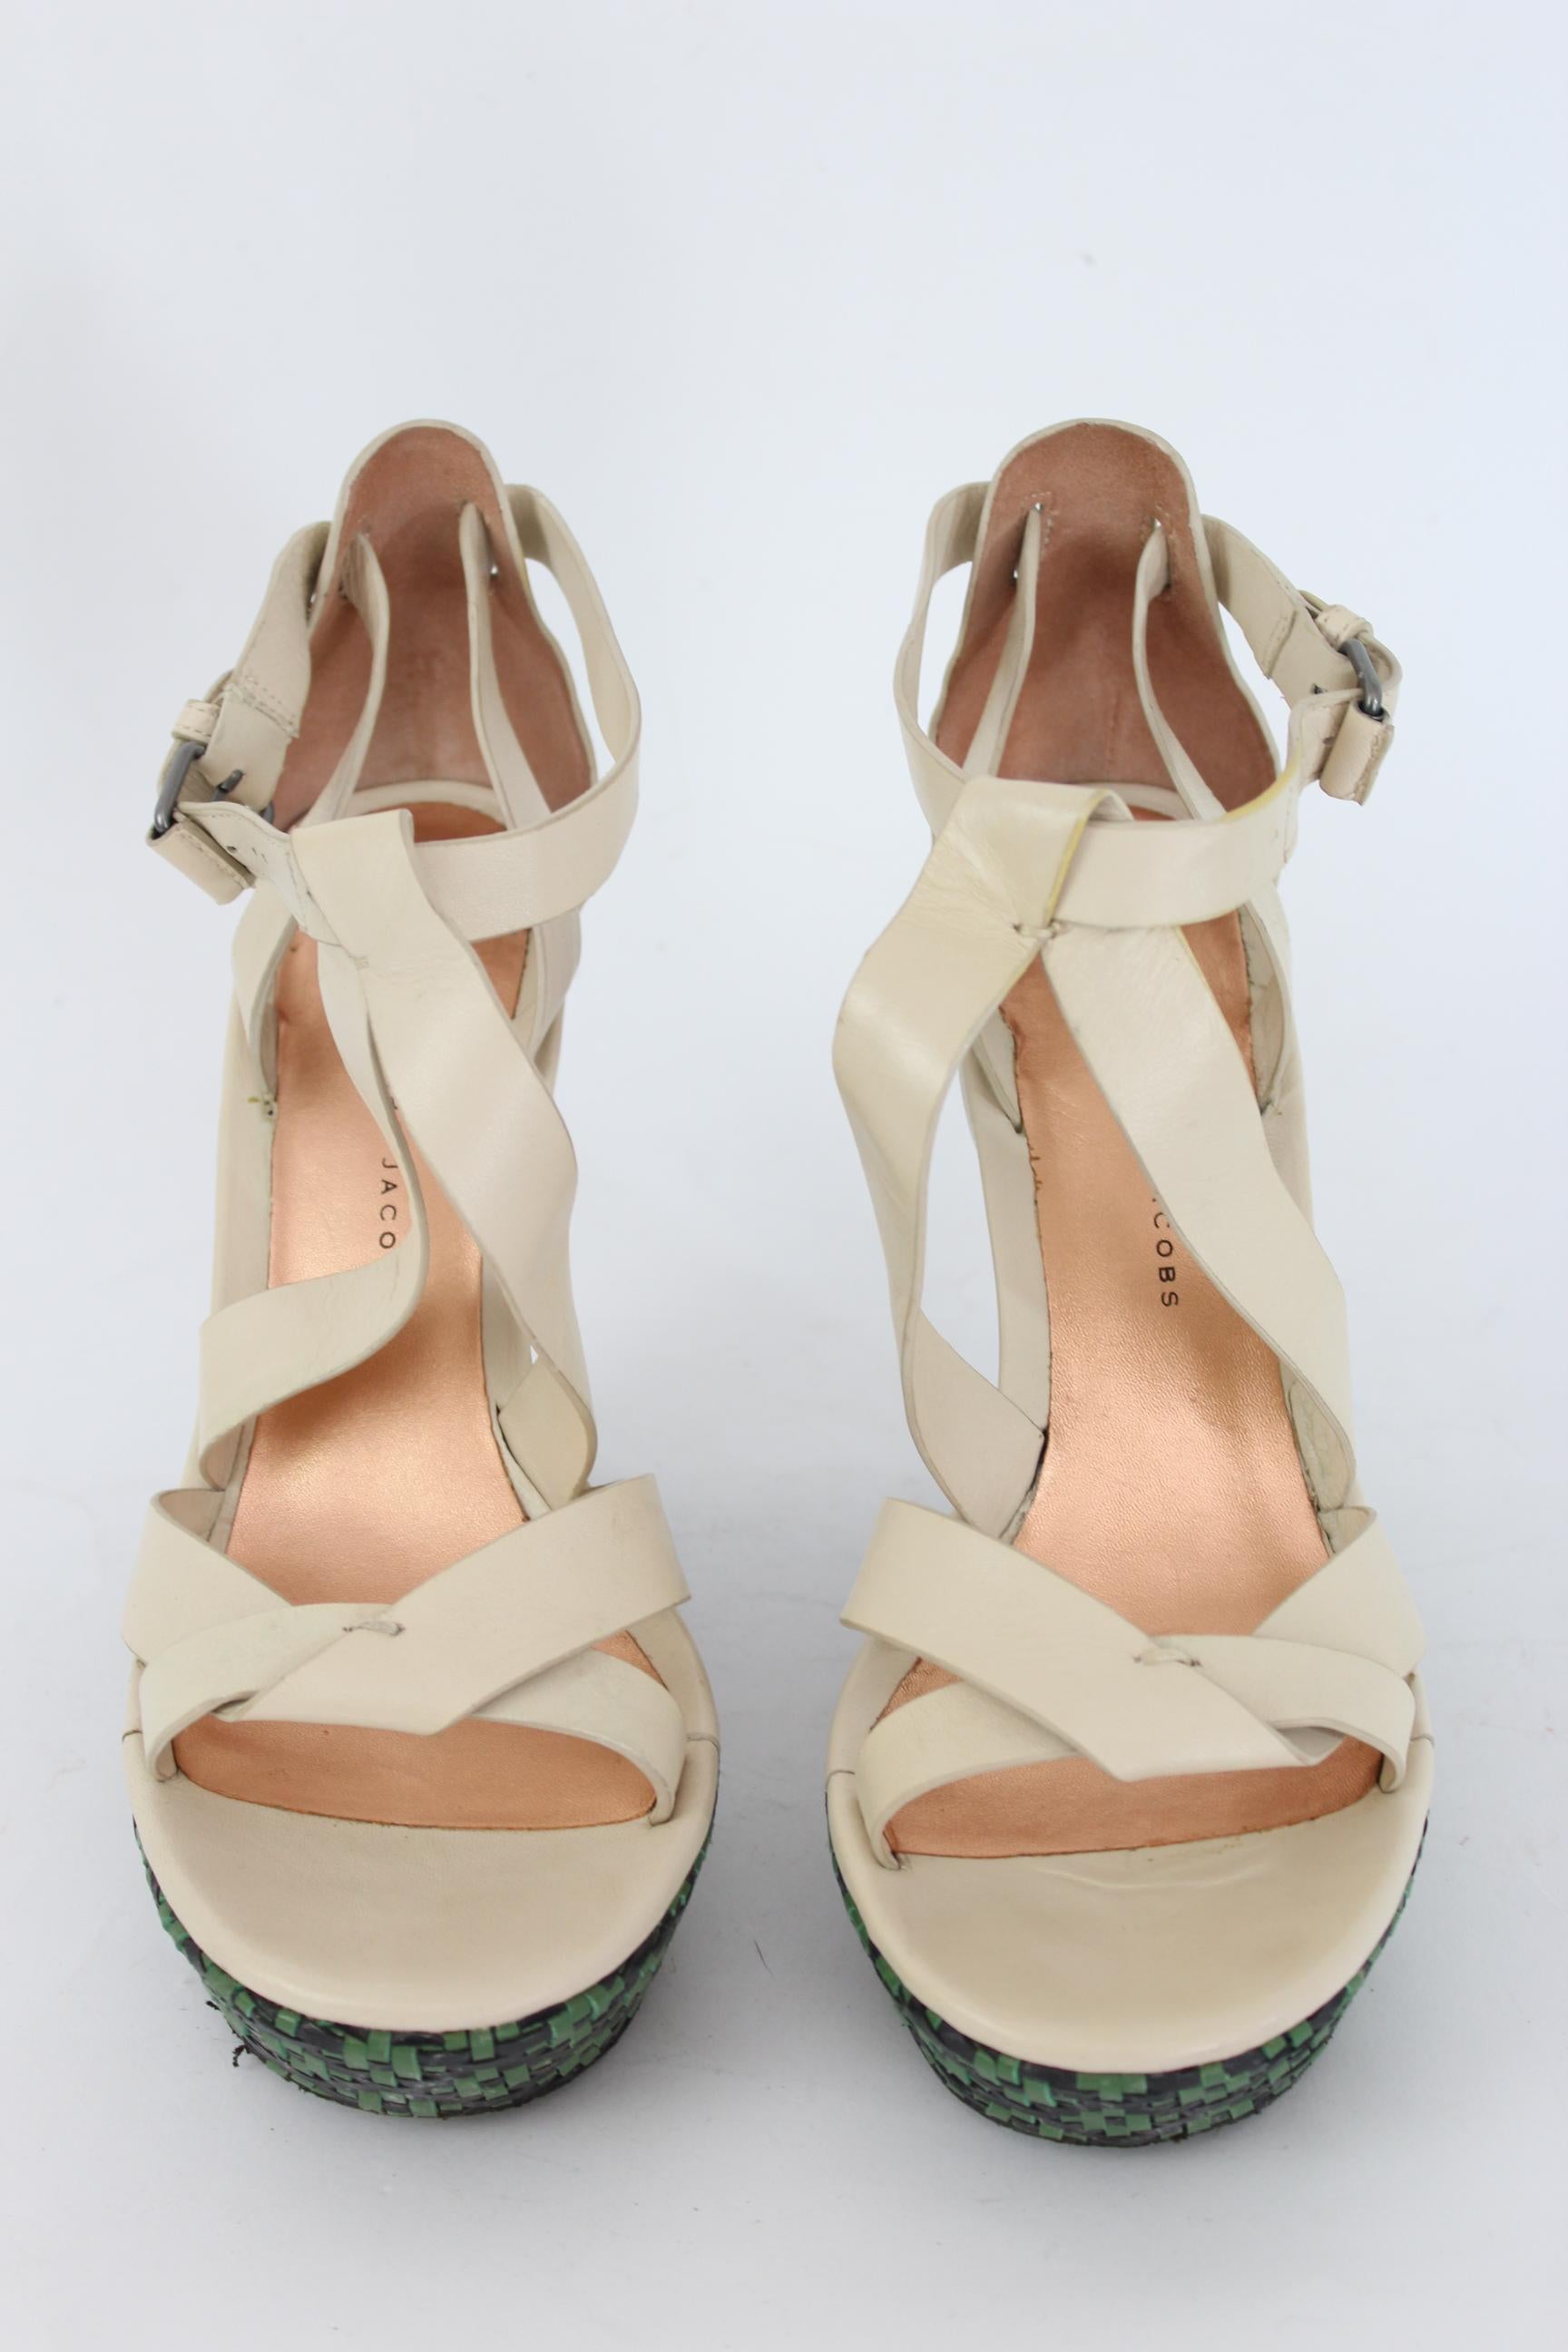 Marc by Marc Jacobs women's shoes 2000s. Sandal with open toe, beige and green color, 100% leather. High heel wedge model. Adjustable ankle strap. Made in Italy. Very good condition, some signs of use. Code: 382200

Size: 38 It 7.5 Us 5 Uk

Heel